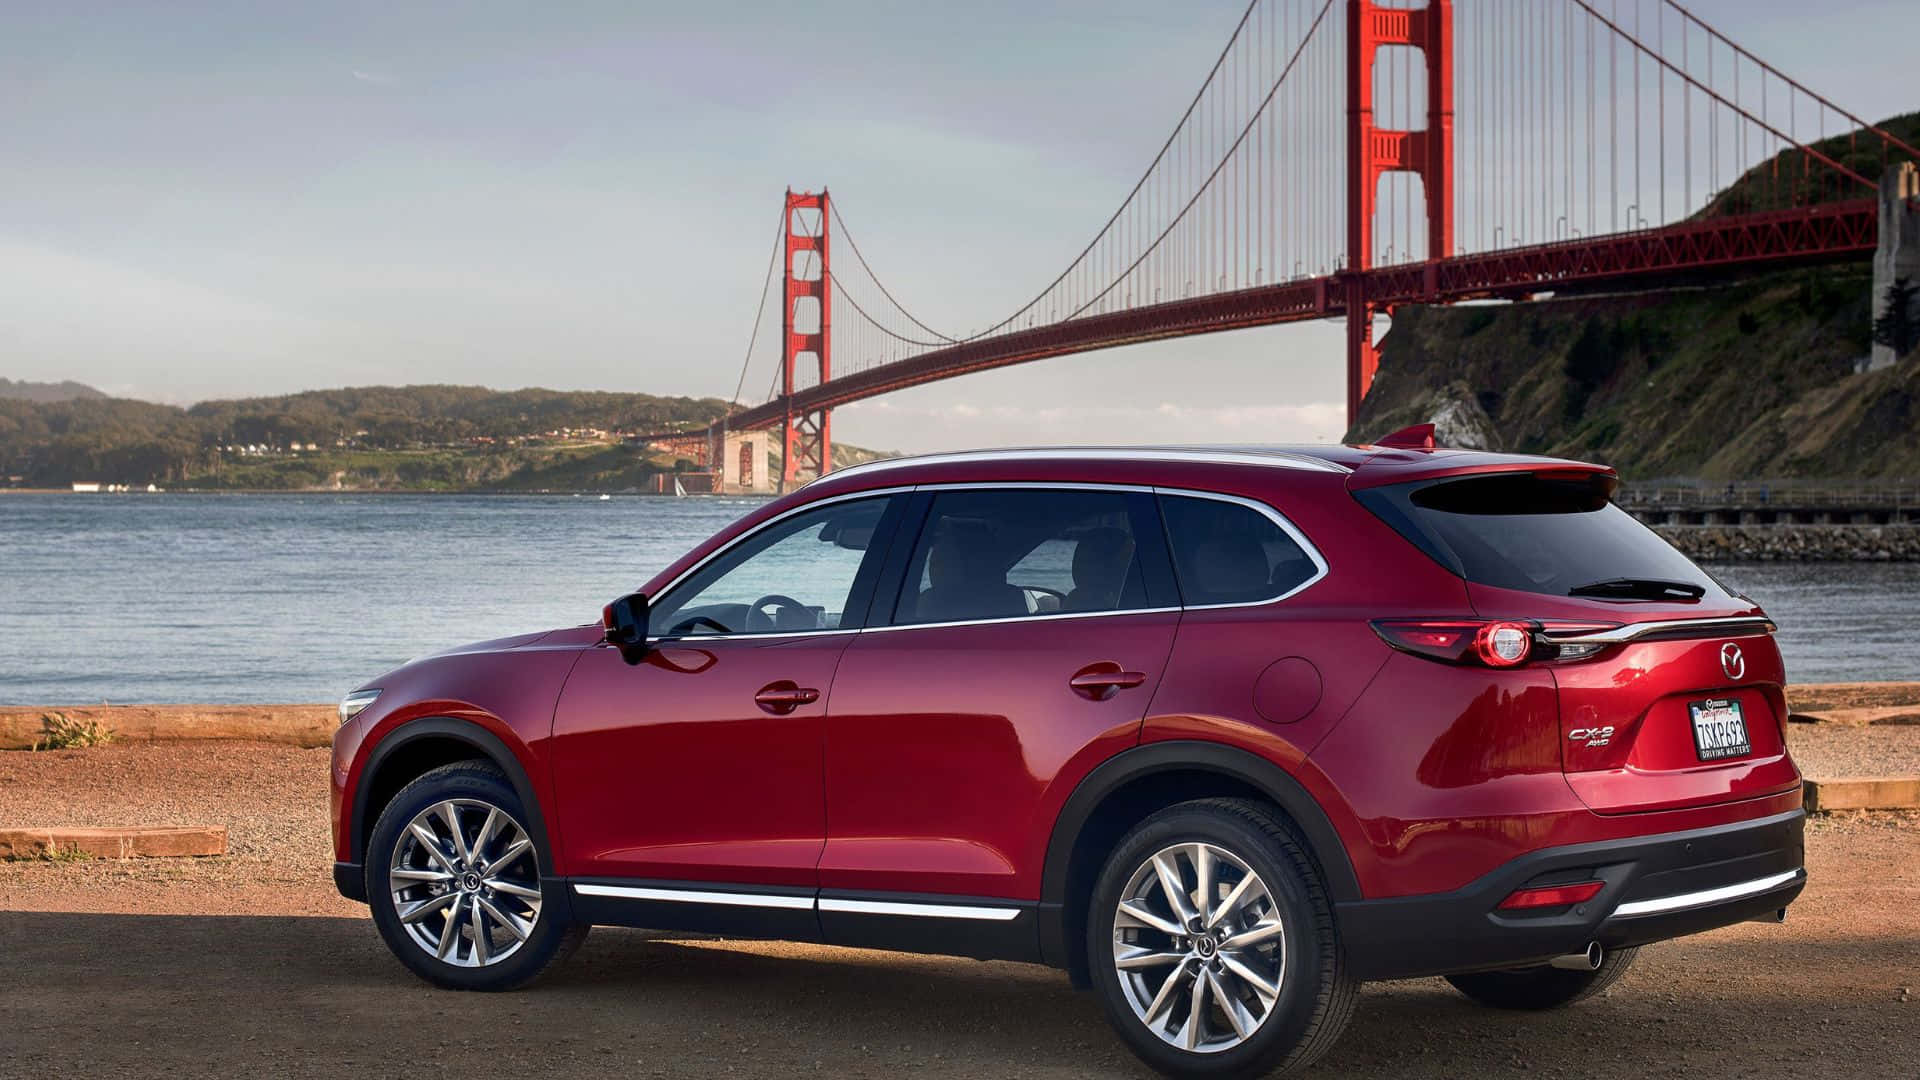 Sleek and Stylish Mazda CX-9 in Action Wallpaper